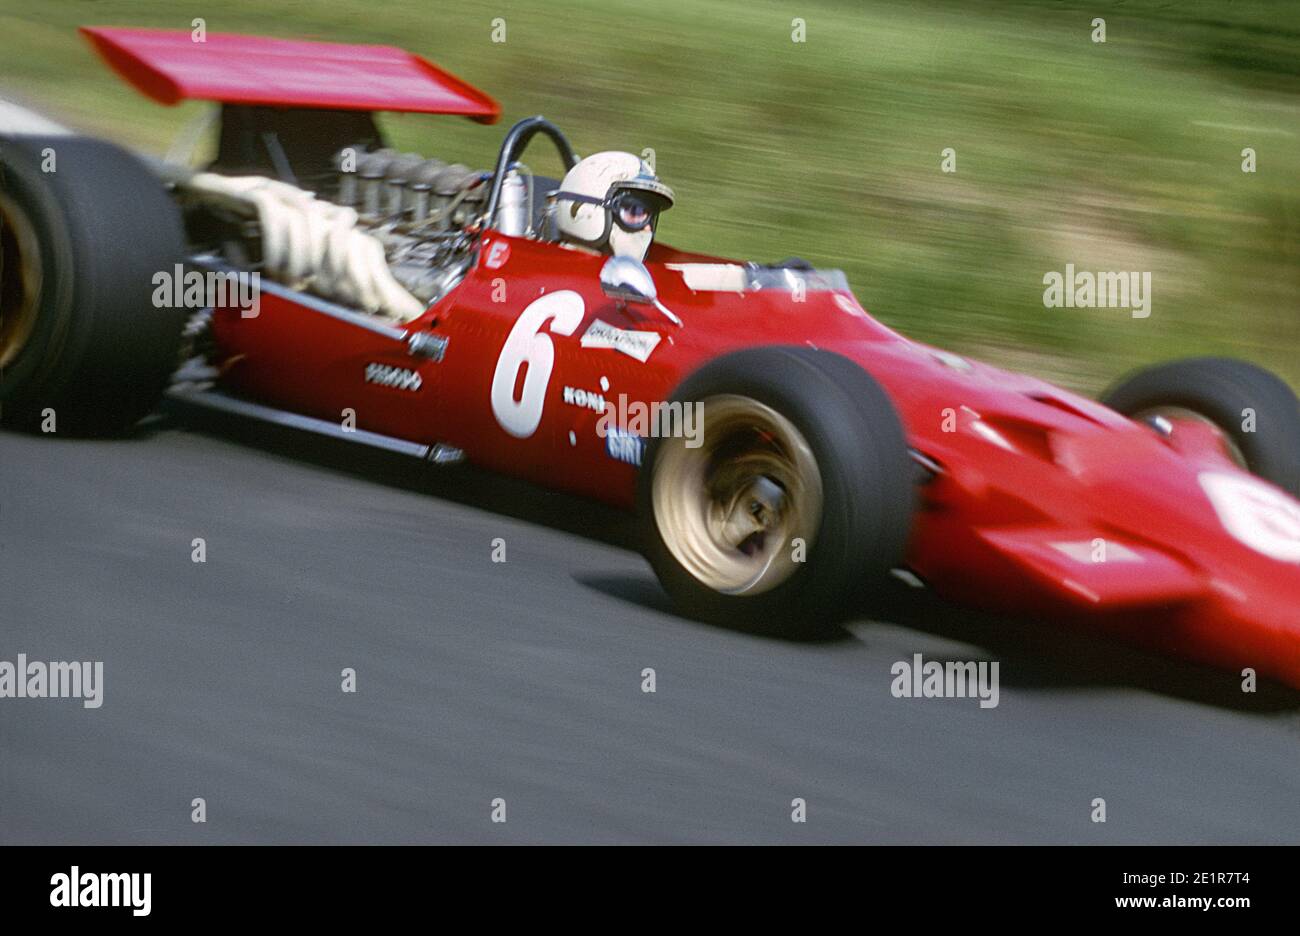 Chris AMON driving Ferrari F1 car in full speed during 1969 Grand Prix de France, in Charade circuit near Clermont-Ferrand. Stock Photo